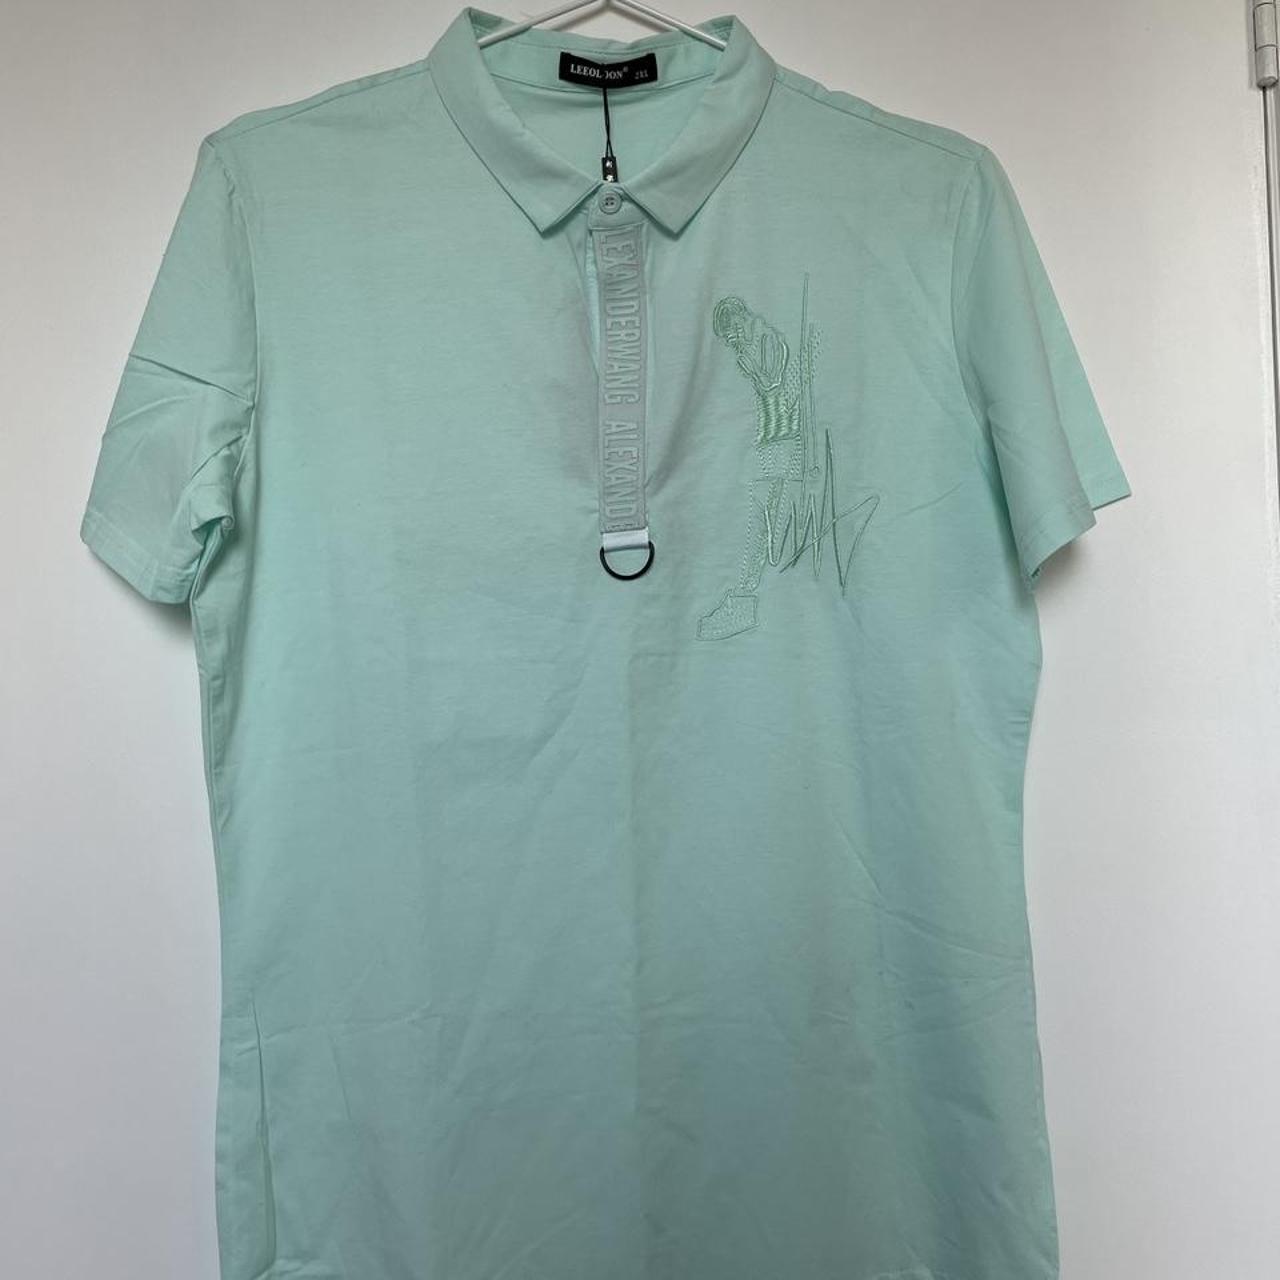 Teal polo with embroidery design Brand new with tags... - Depop